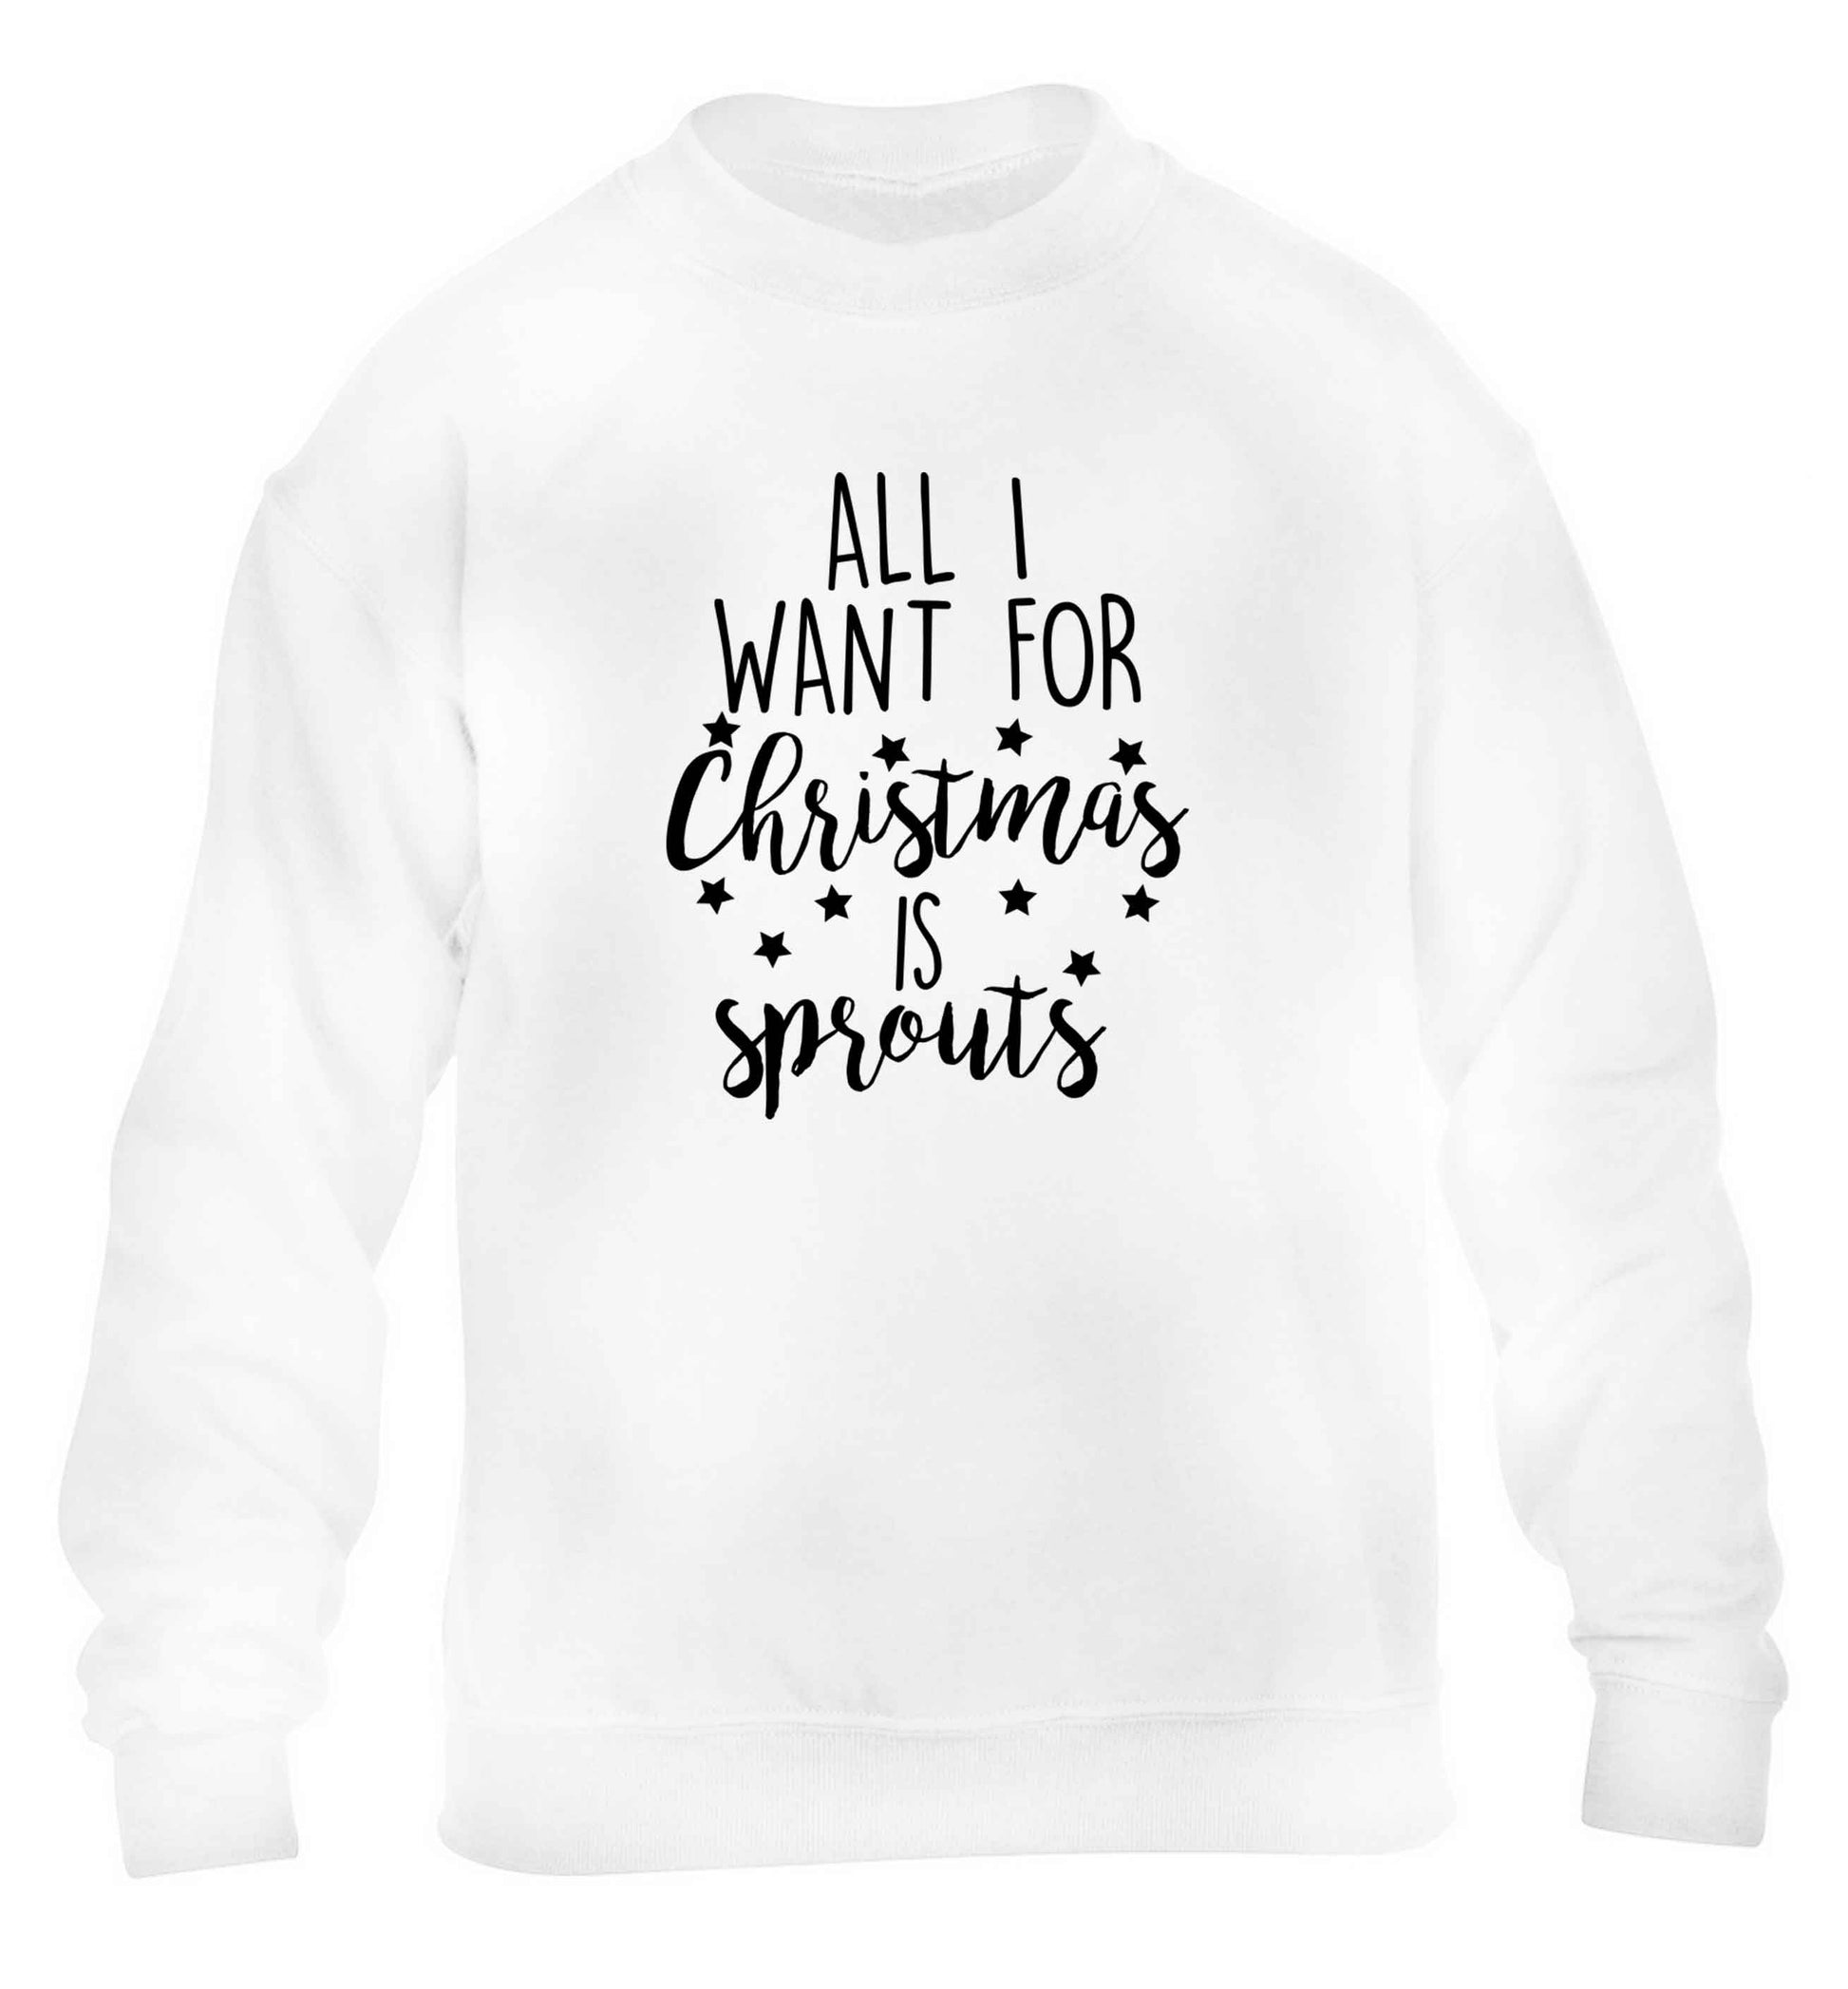 All I want for Christmas is sprouts children's white sweater 12-13 Years